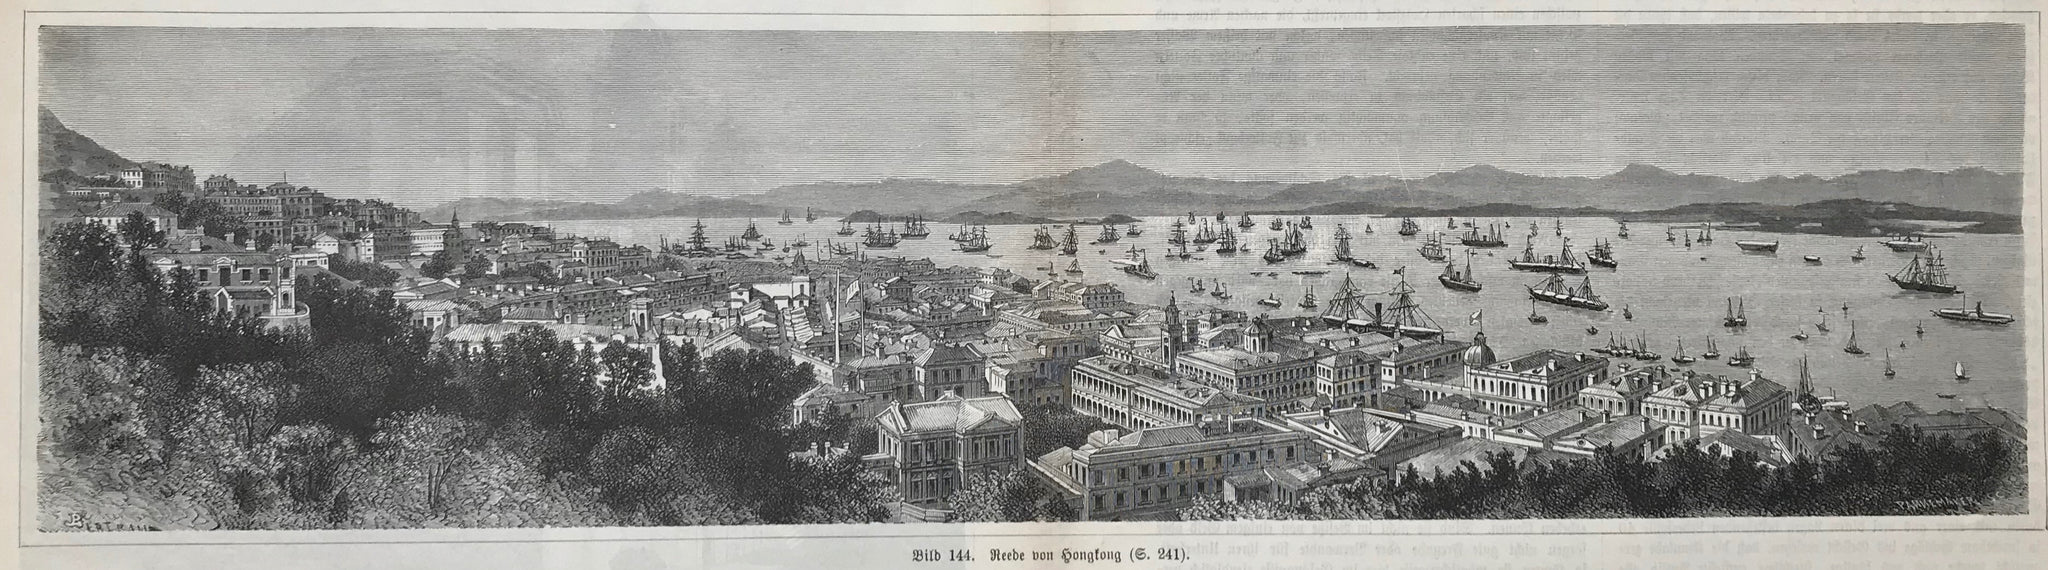 China, Hongkong, Panorama view of Hongkong  Wood engraving by Stephan Pannemaker (1847-1930)  From a German publication, 1895  Very good condition. Book page with printed Text above, below and verso including a wood engraving of St. John's Cathedral in Hongkong. Centerold.